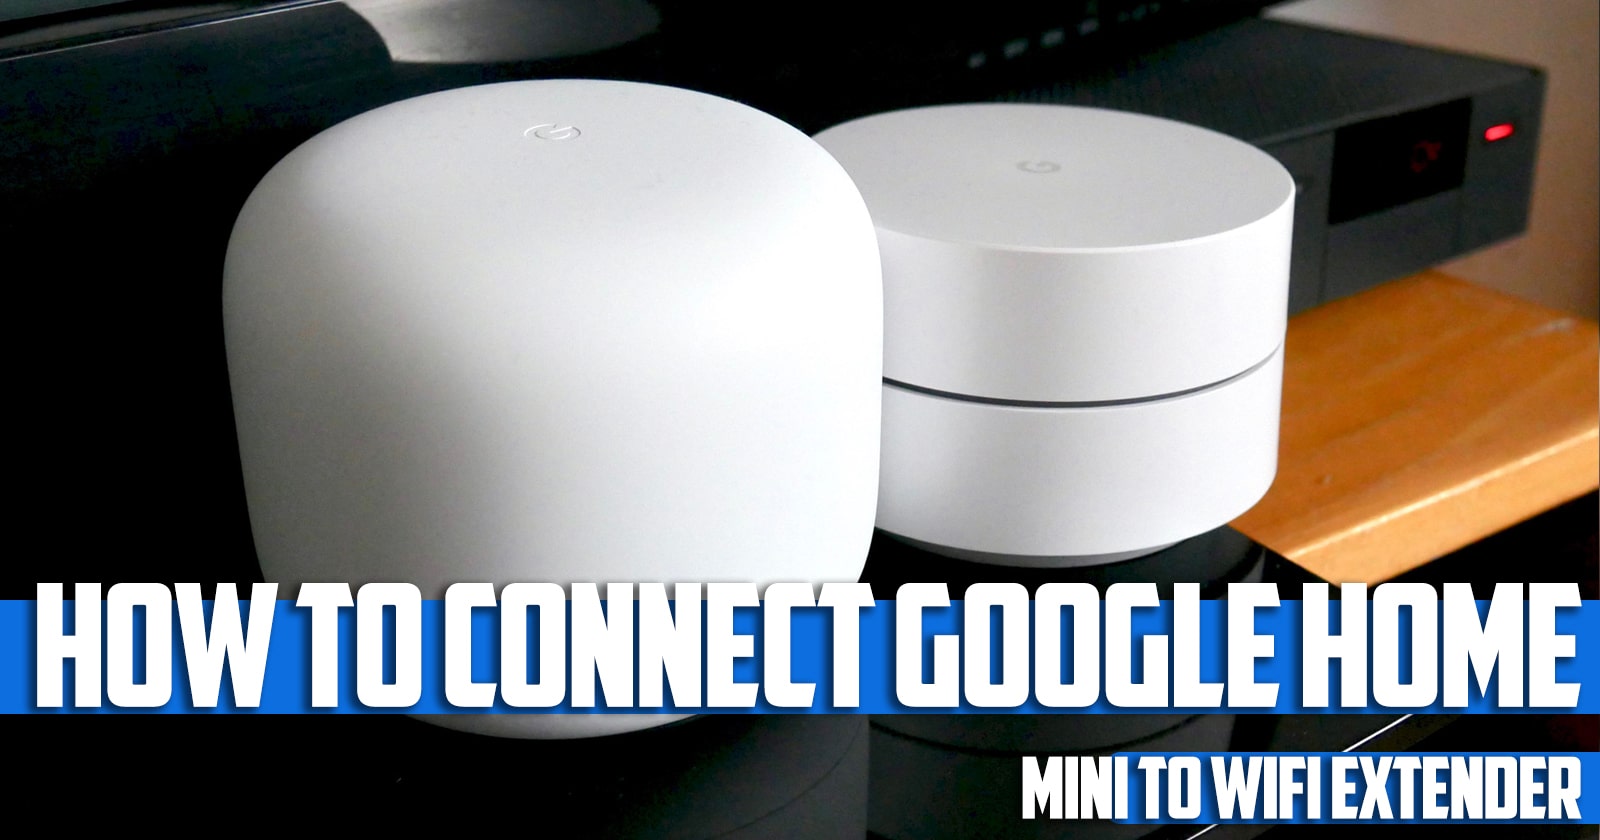 How to Connect Google Home Mini to WiFi Extender